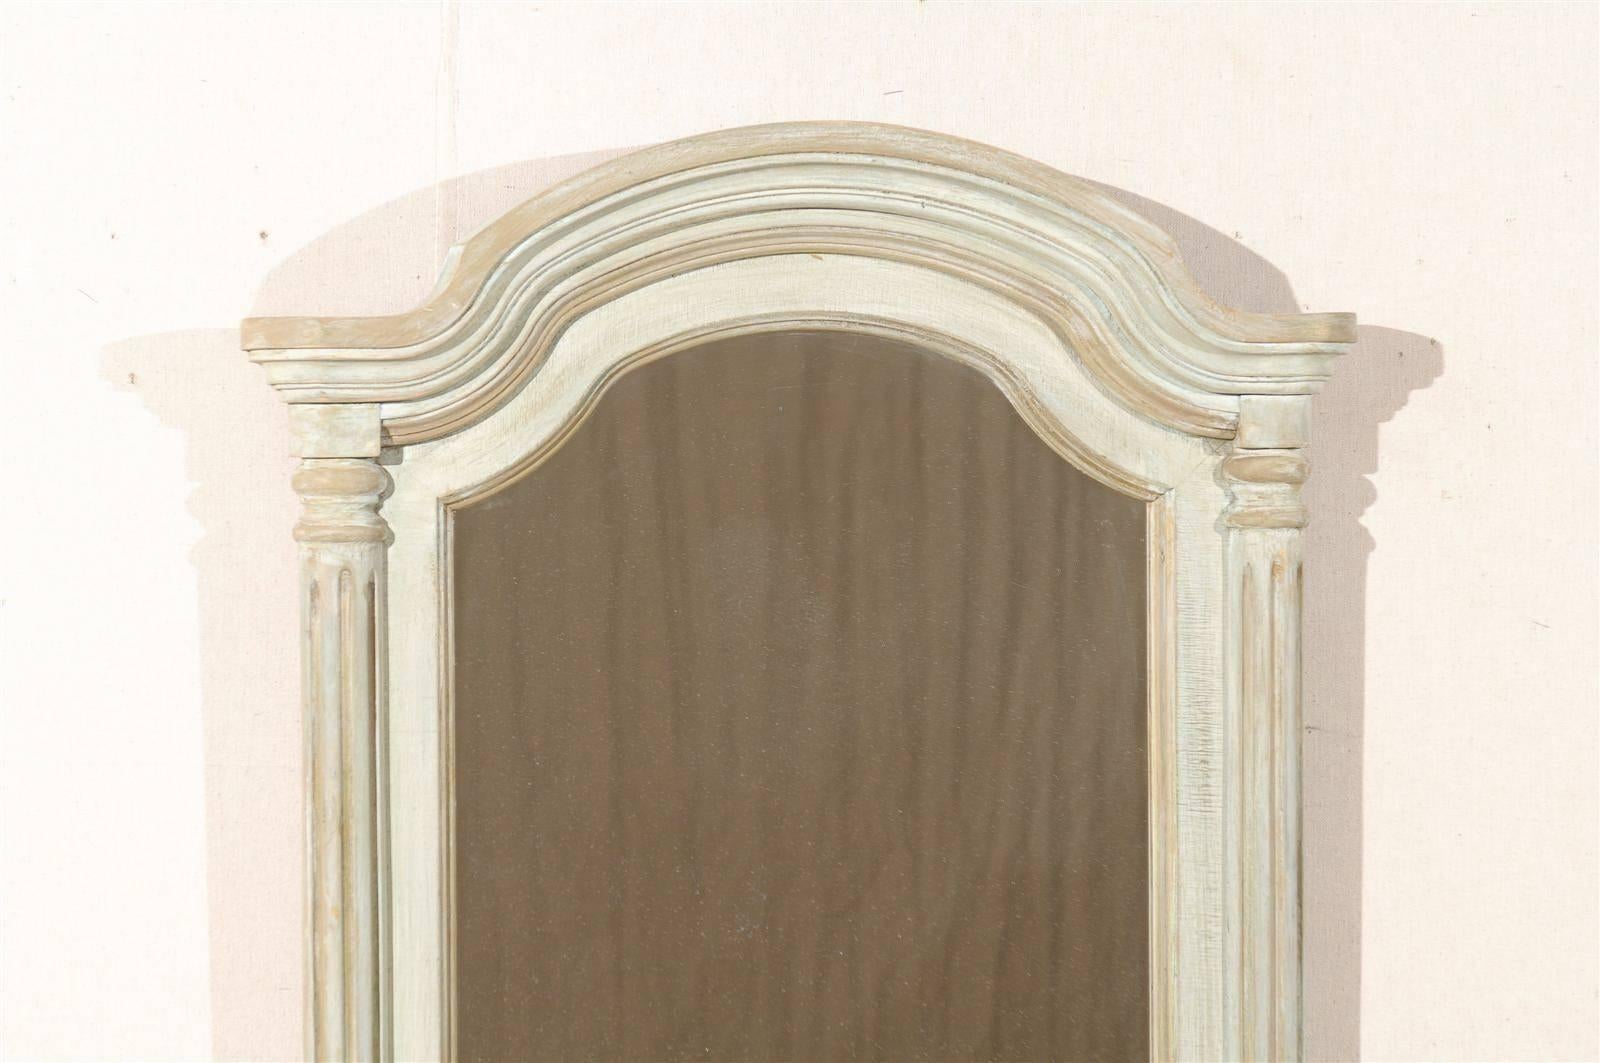 20th Century Pair of American Painted Wood Mirrors with Arched Crest